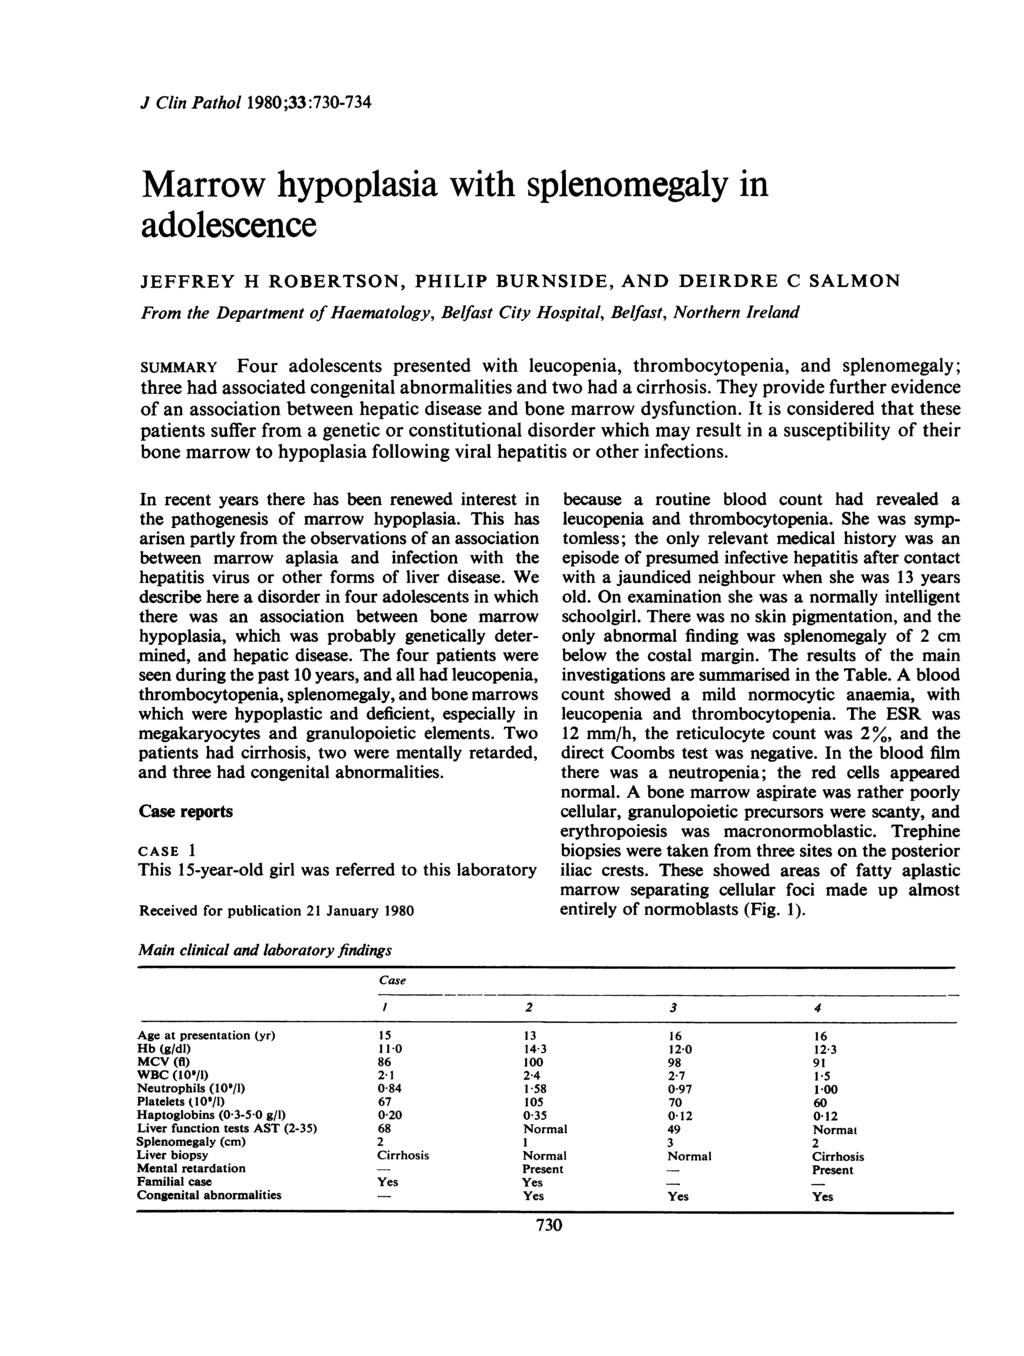 J Clin Pathol 1980;33:730-734 Marrow hypoplasia with splenomegaly in adolescence JEFFREY H ROBERTSON, PHILIP BURNSIDE, AND DEIRDRE C SALMON From the Department of Haematology, Belfast City Hospital,